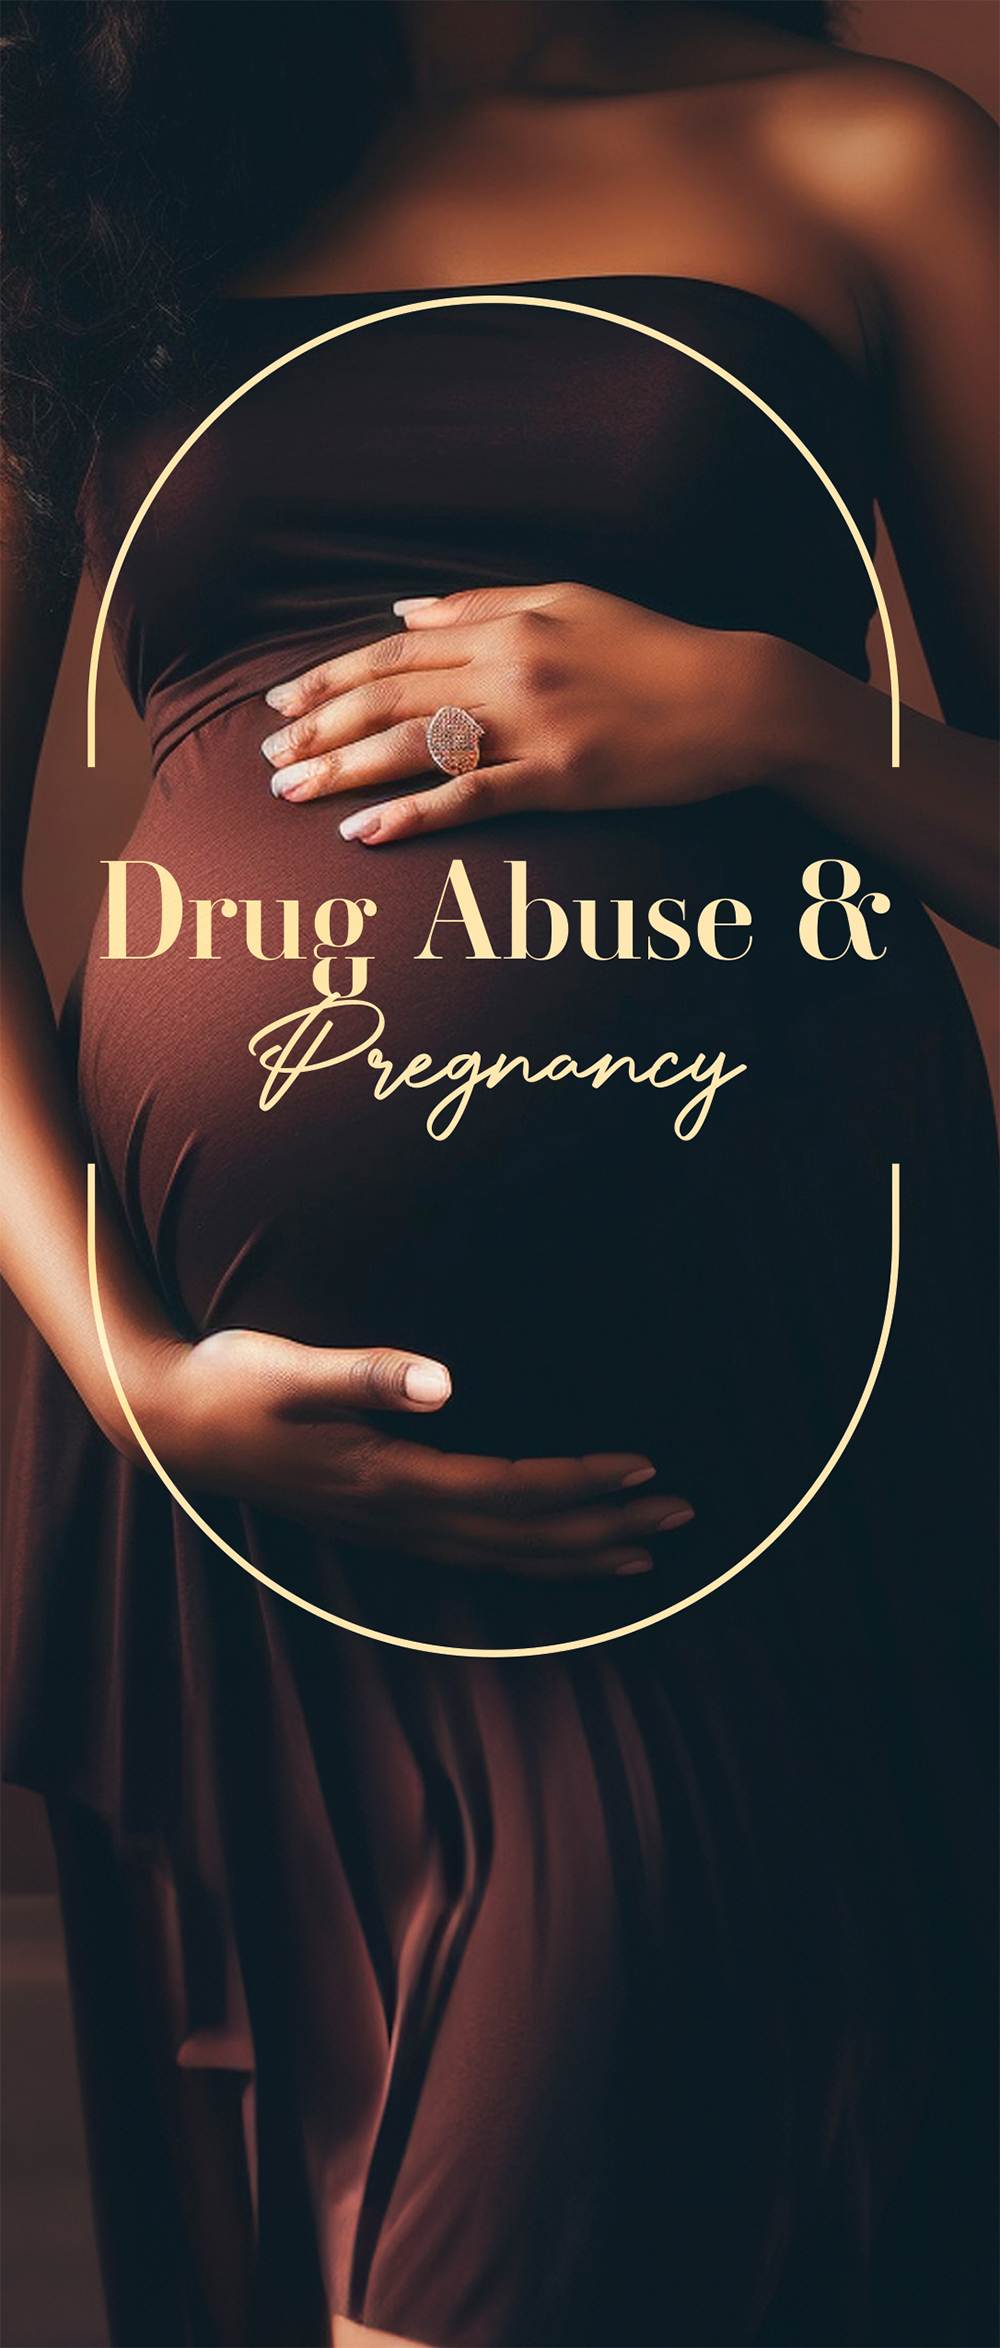 Literature, Drug Abuse and Pregnancy: 50/pk